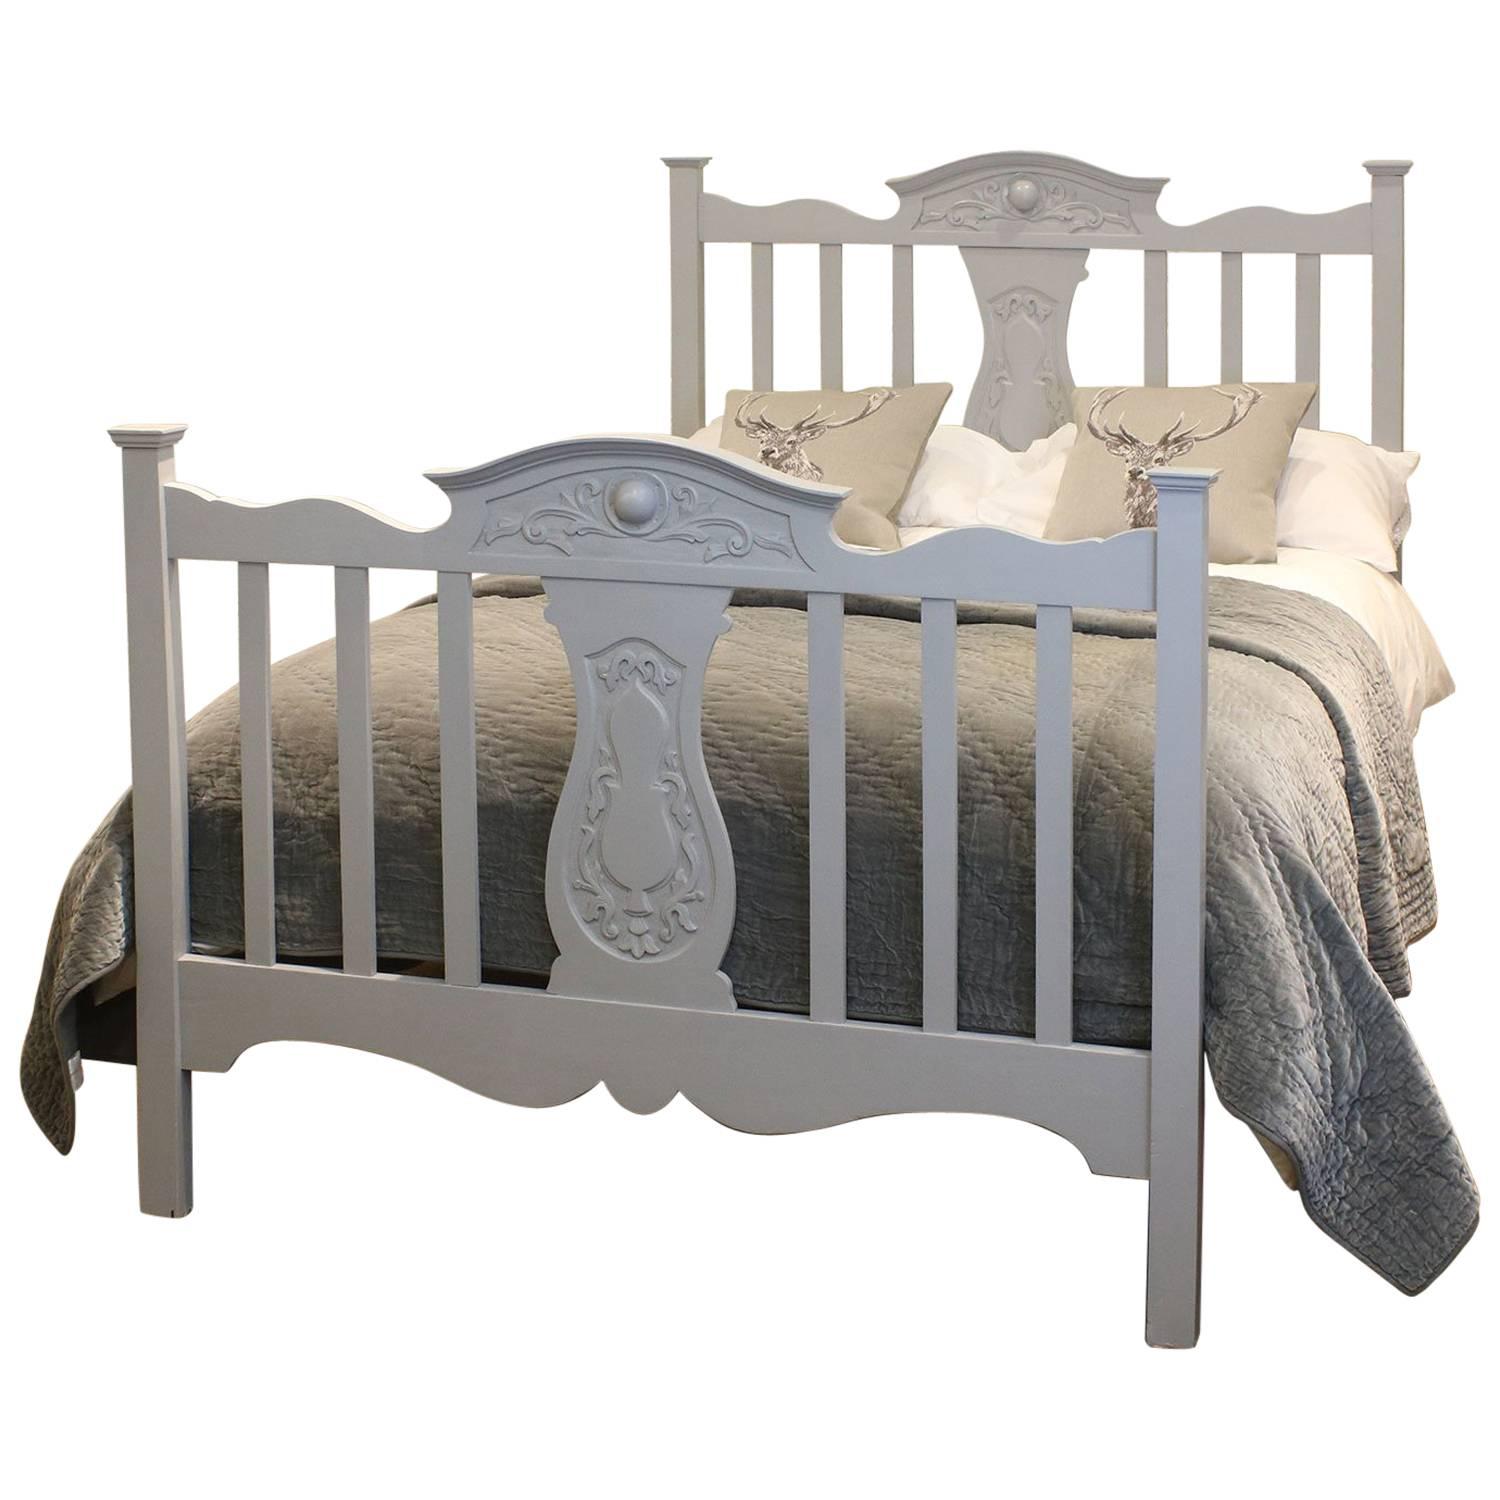 Edwardian Wooden Bed in Grey, WD21